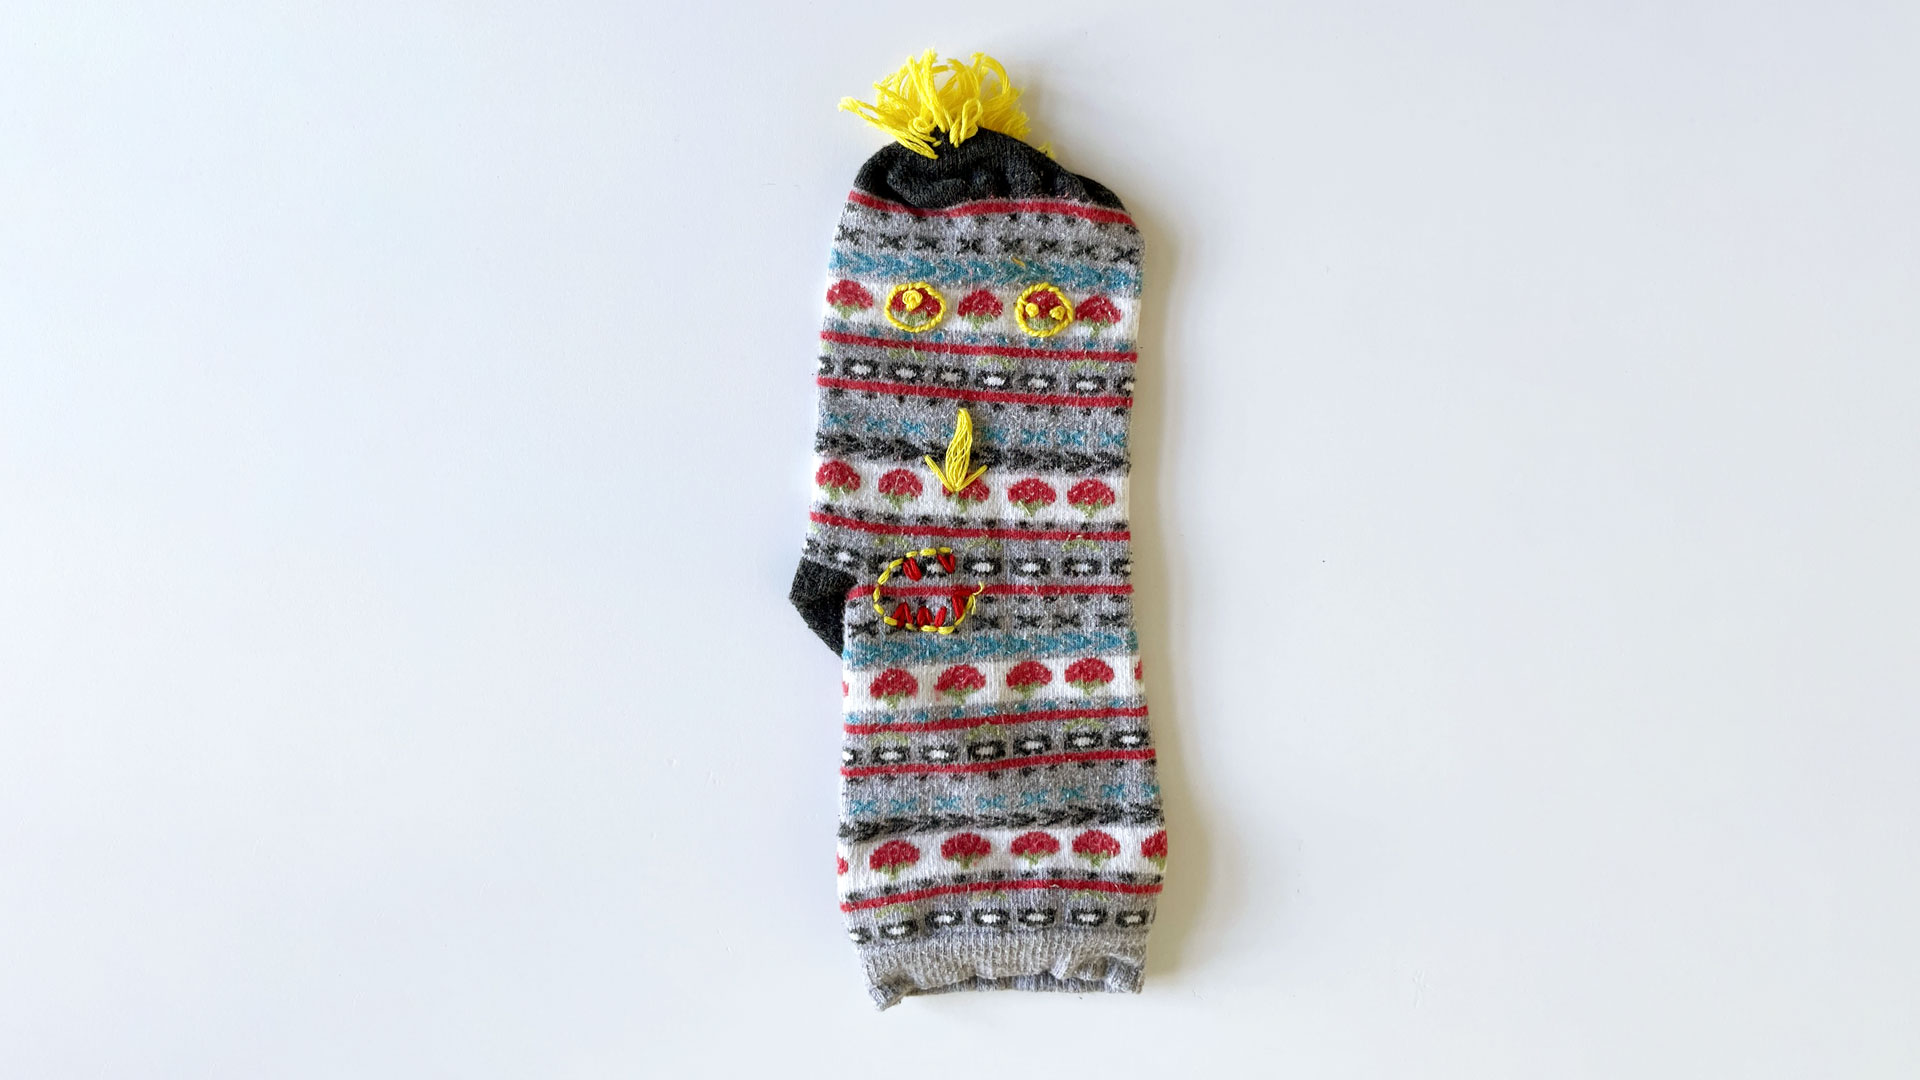 A colourful striped sock with yellow and red embroidery decoration, which resembles a face.